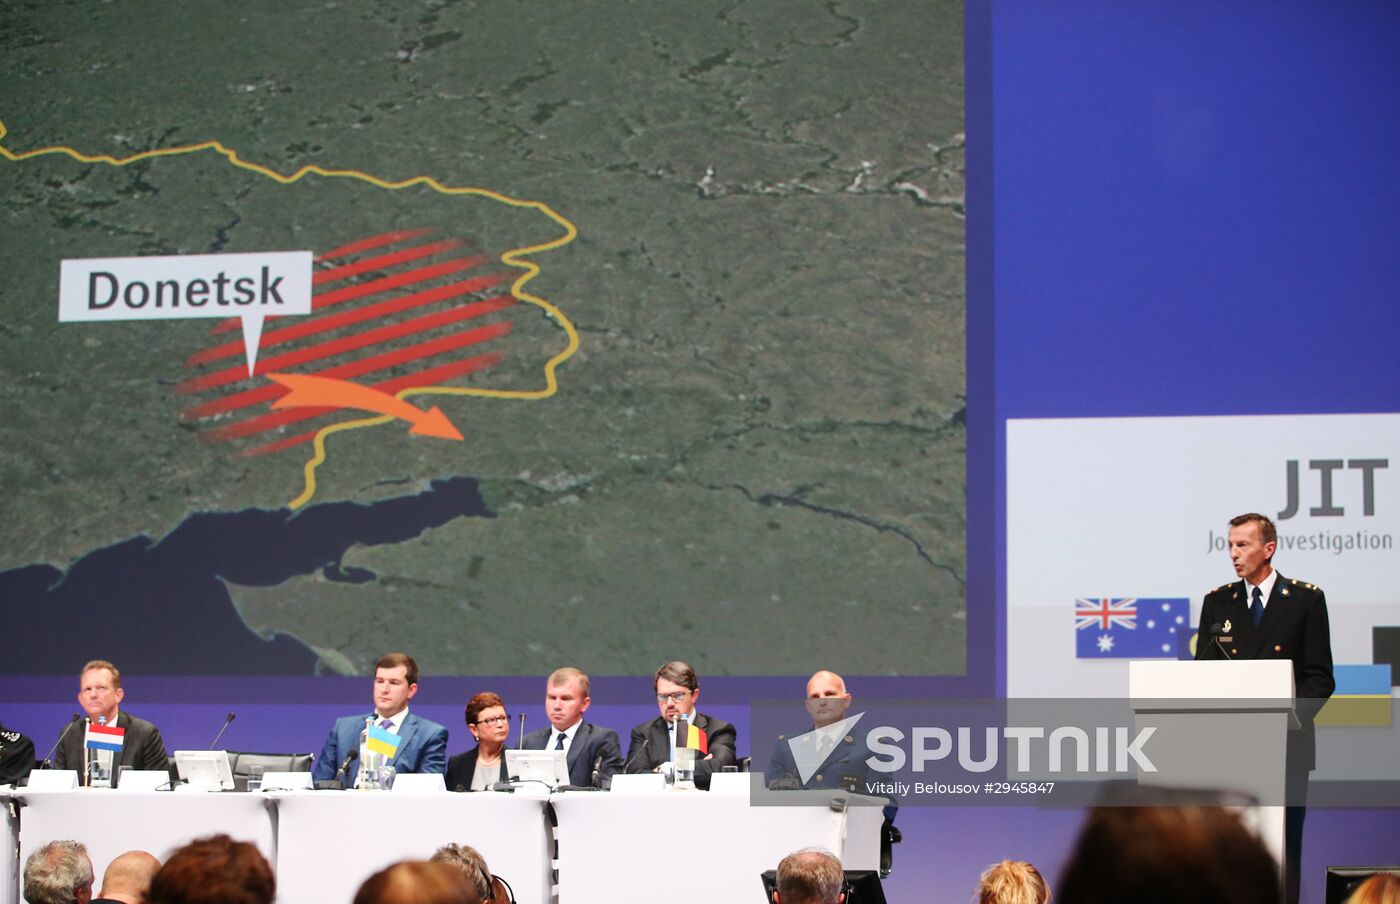 Netherlands announce preliminary investigation results of Malaysia Airlines Flight MH17 crash